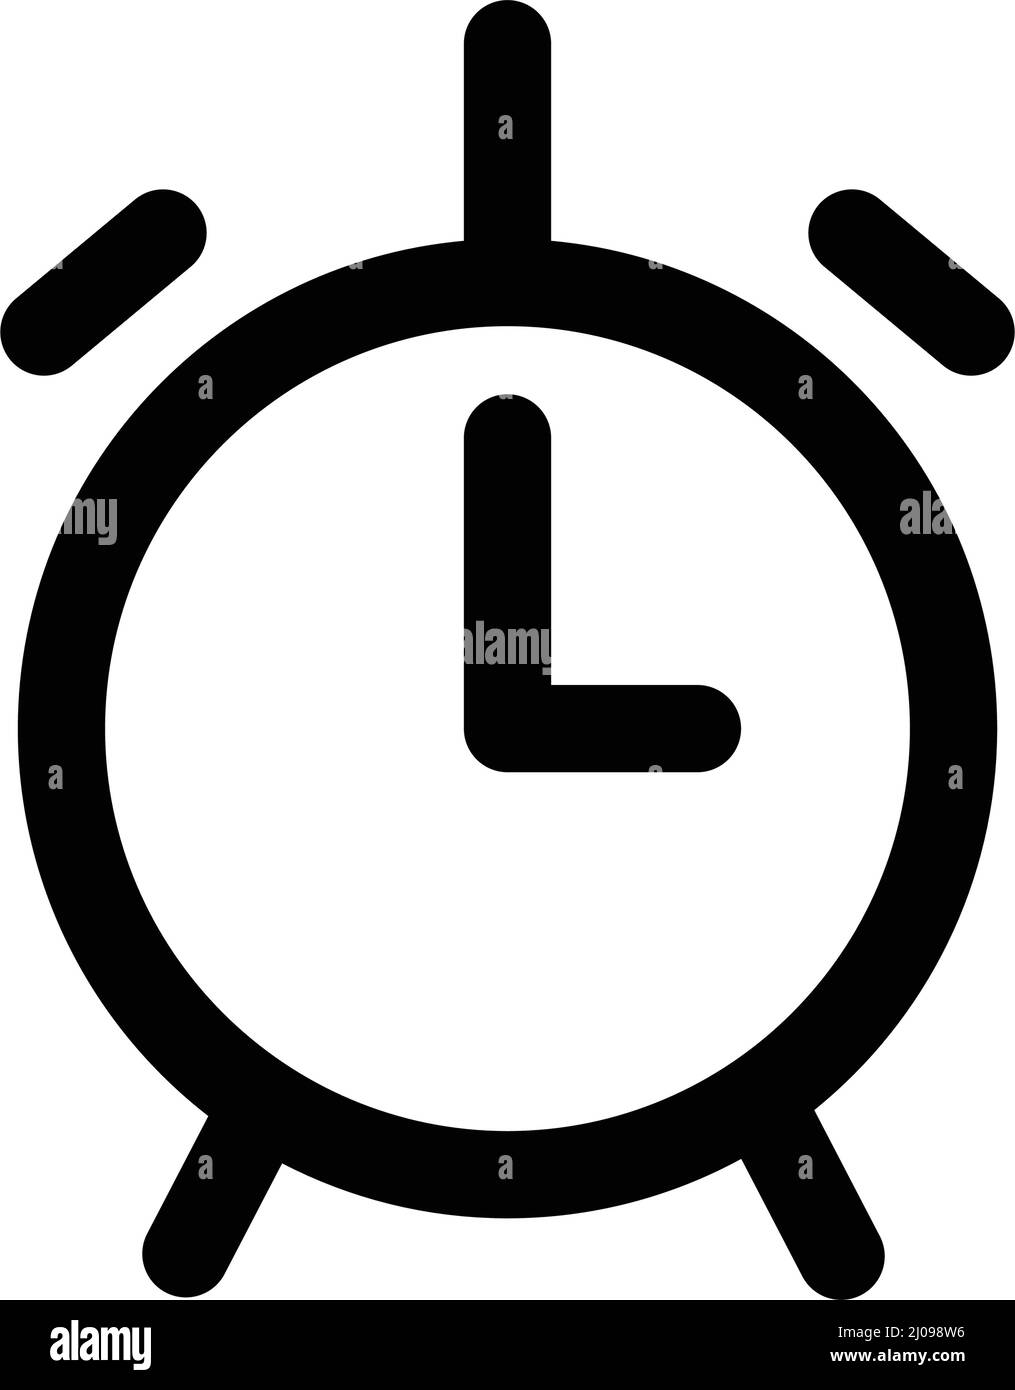 Alarm clock silhouette icon. Notification and timer. Editable vectors. Stock Vector